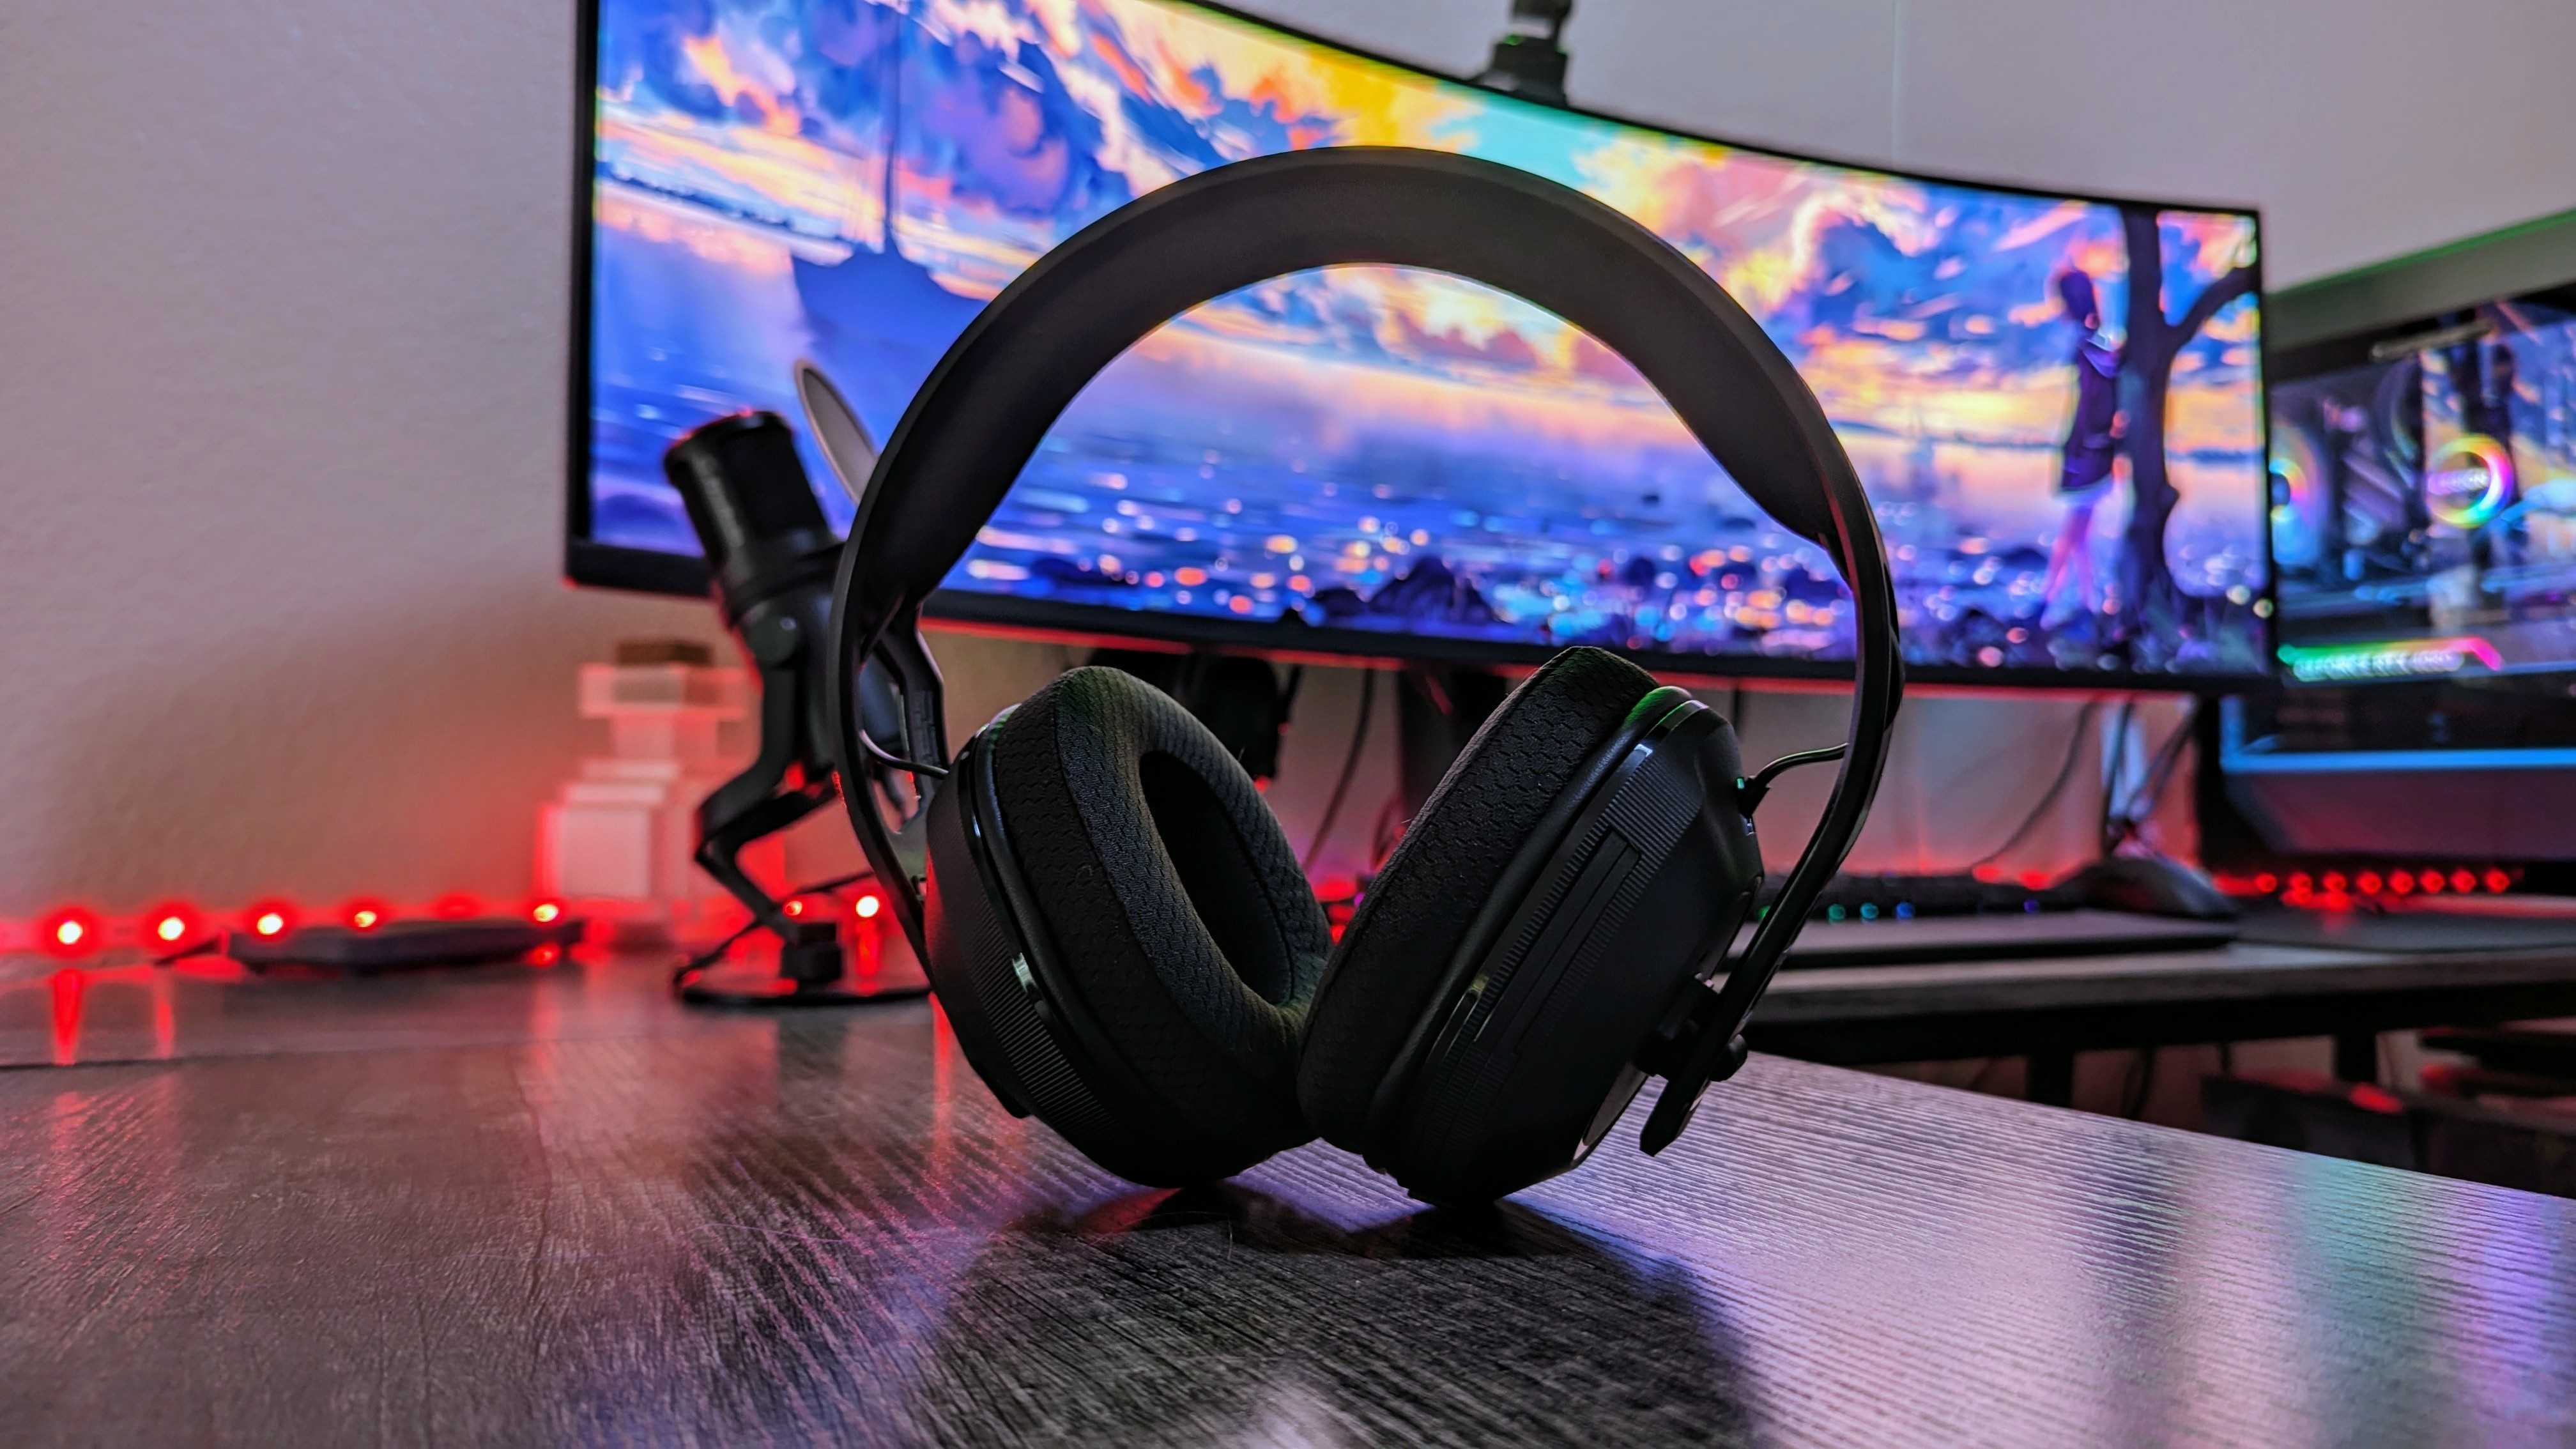 Image of the RIG 600 Pro HX wireless gaming headset for Xbox and PC.